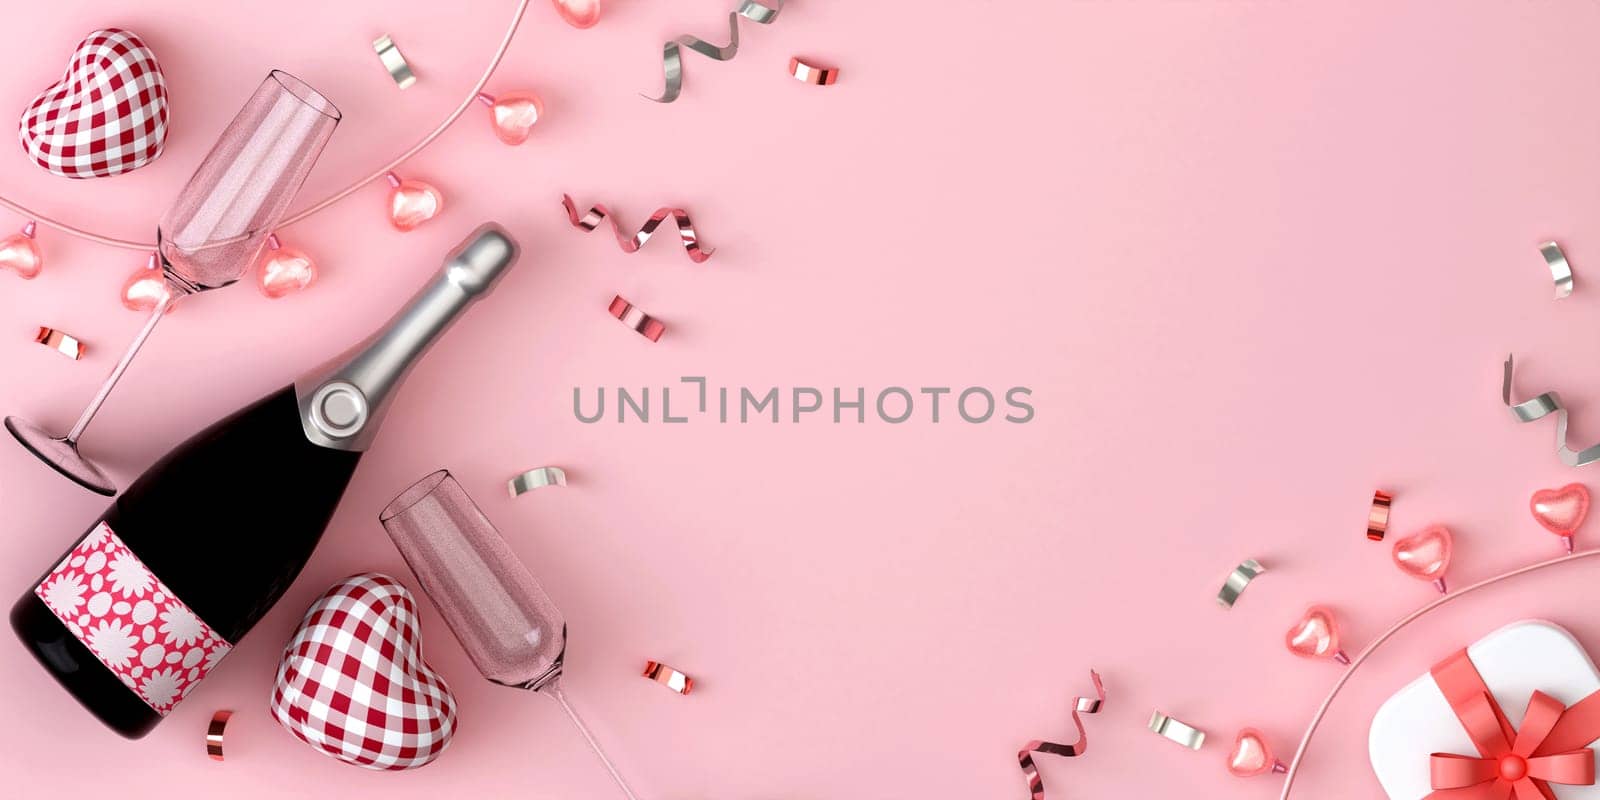 Valentines Day with champagne, gift box and ball light decor. Holiday illustration banner. for valentine and mother day anniversary design. 3d rendering illustration by meepiangraphic